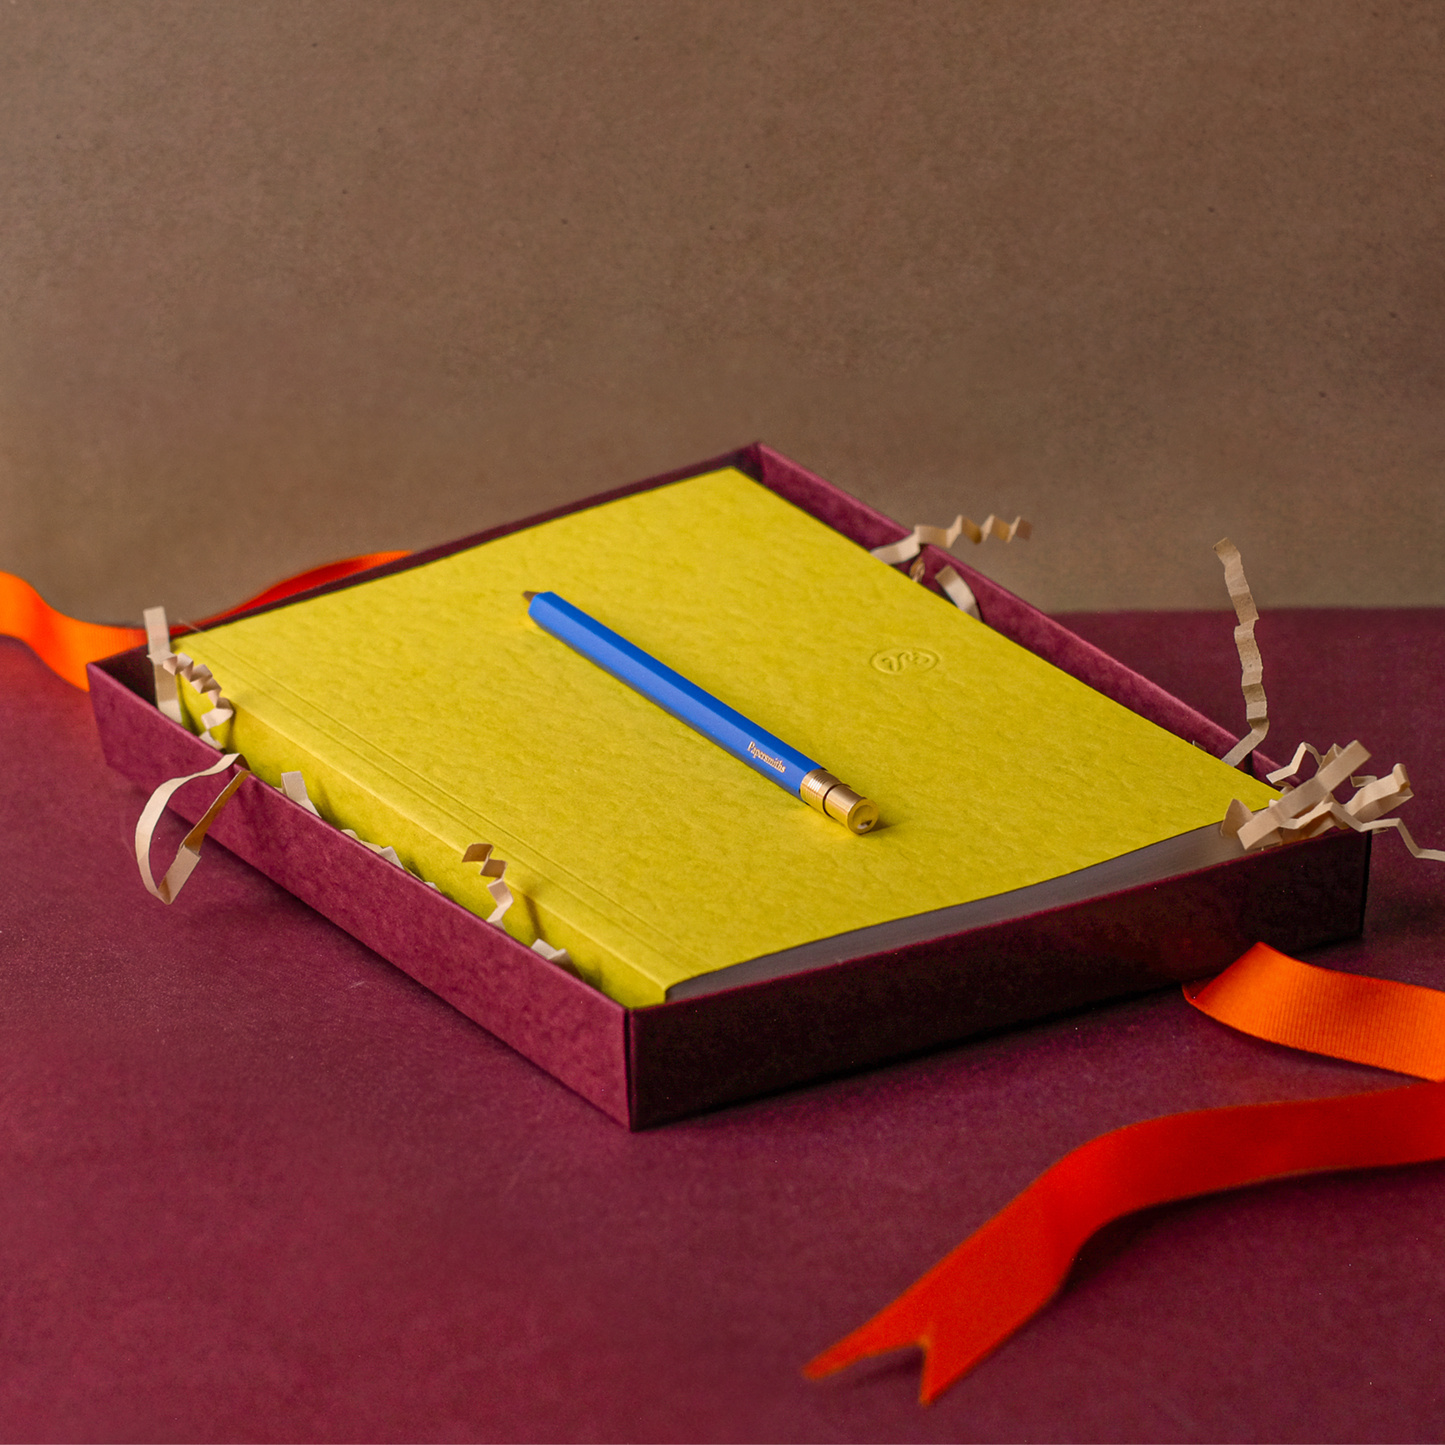 Limoncello Notebook and Pen Duo - Everyday Pen / Plain Paper